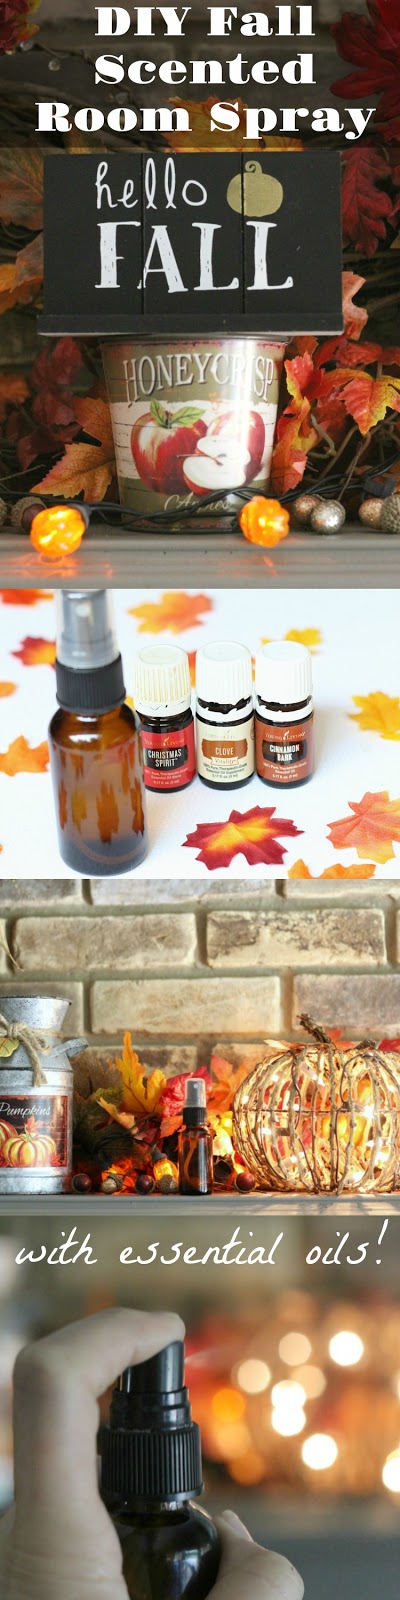 It's easy to make your own nontoxic room sprays, this one is perfect for fall